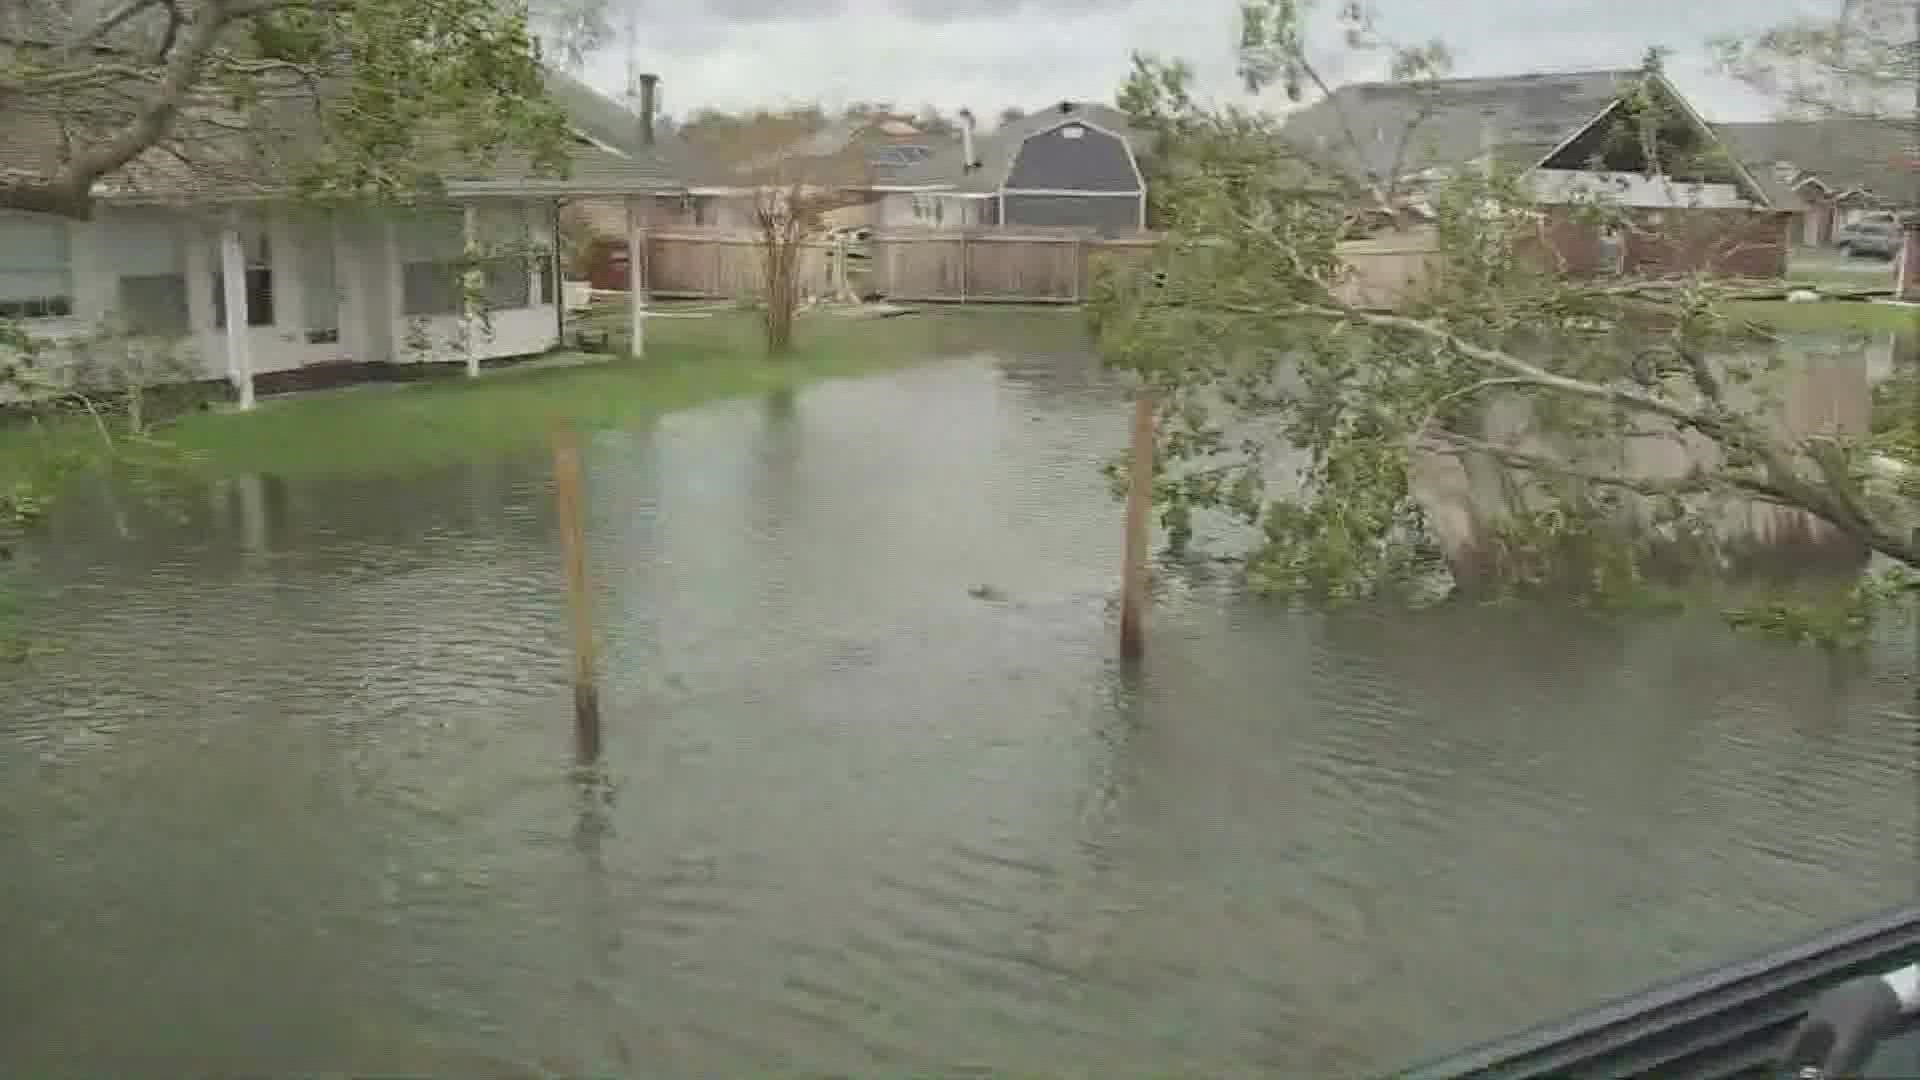 WFAA's William Joy provides a look at the damage in Louisiana caused by Hurricane Ida.